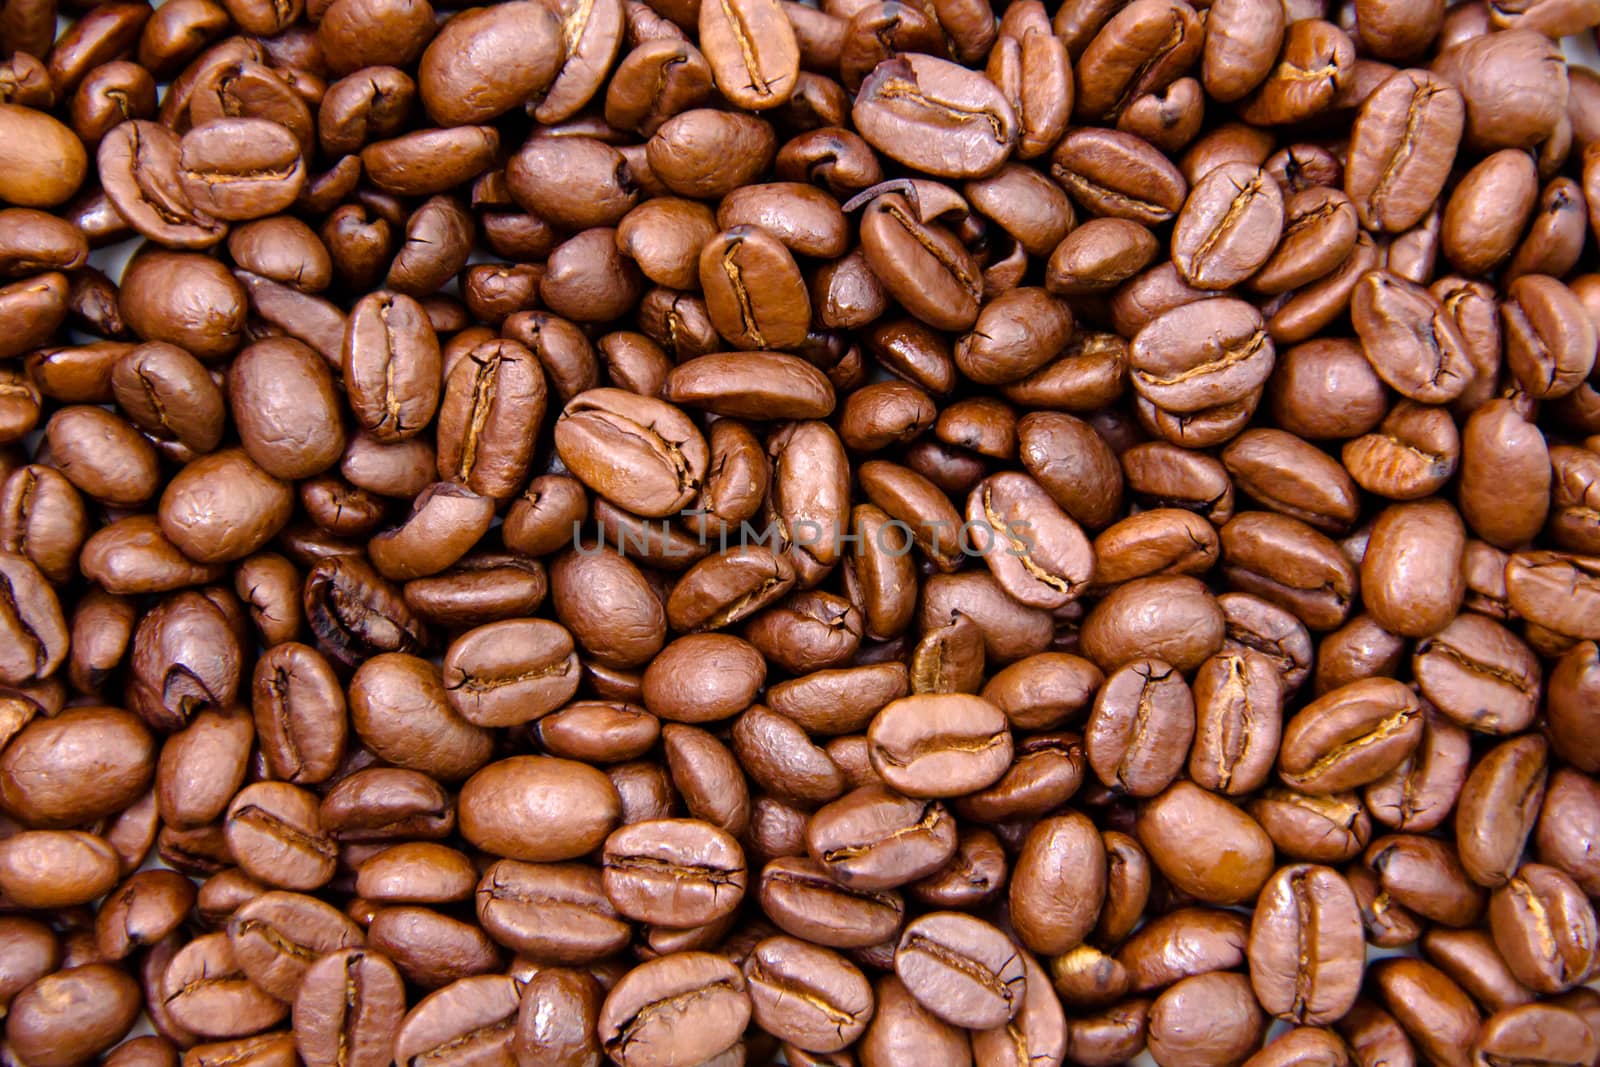 Coffee beans seen up close from above